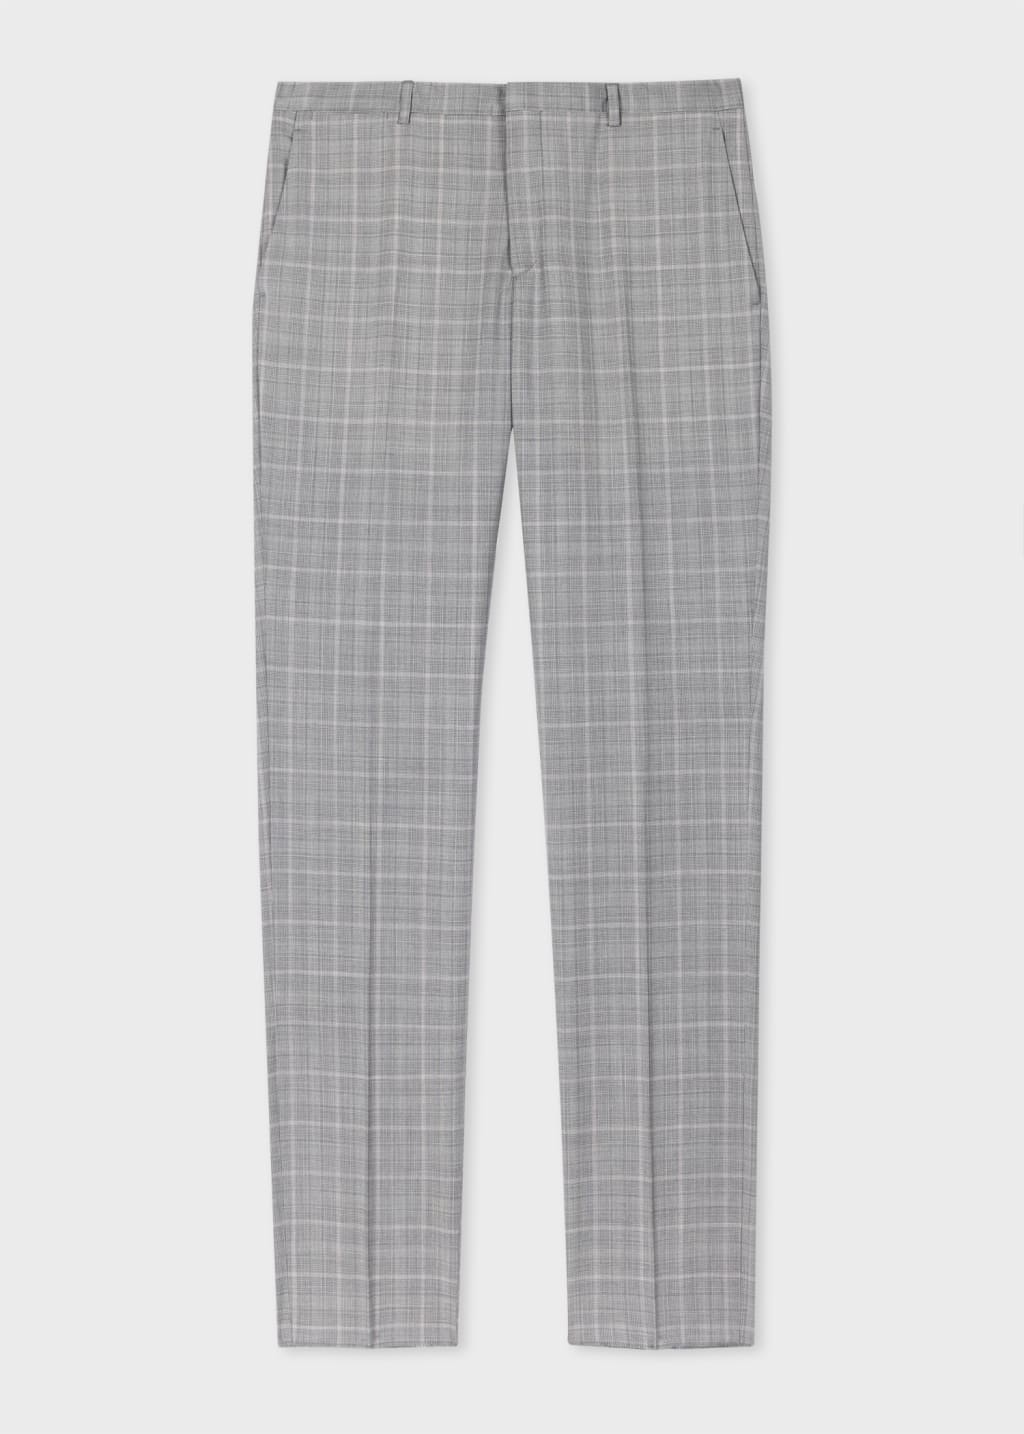 Front View - The Kensington - Slim-Fit Grey and Pink Check Wool Suit Paul Smith